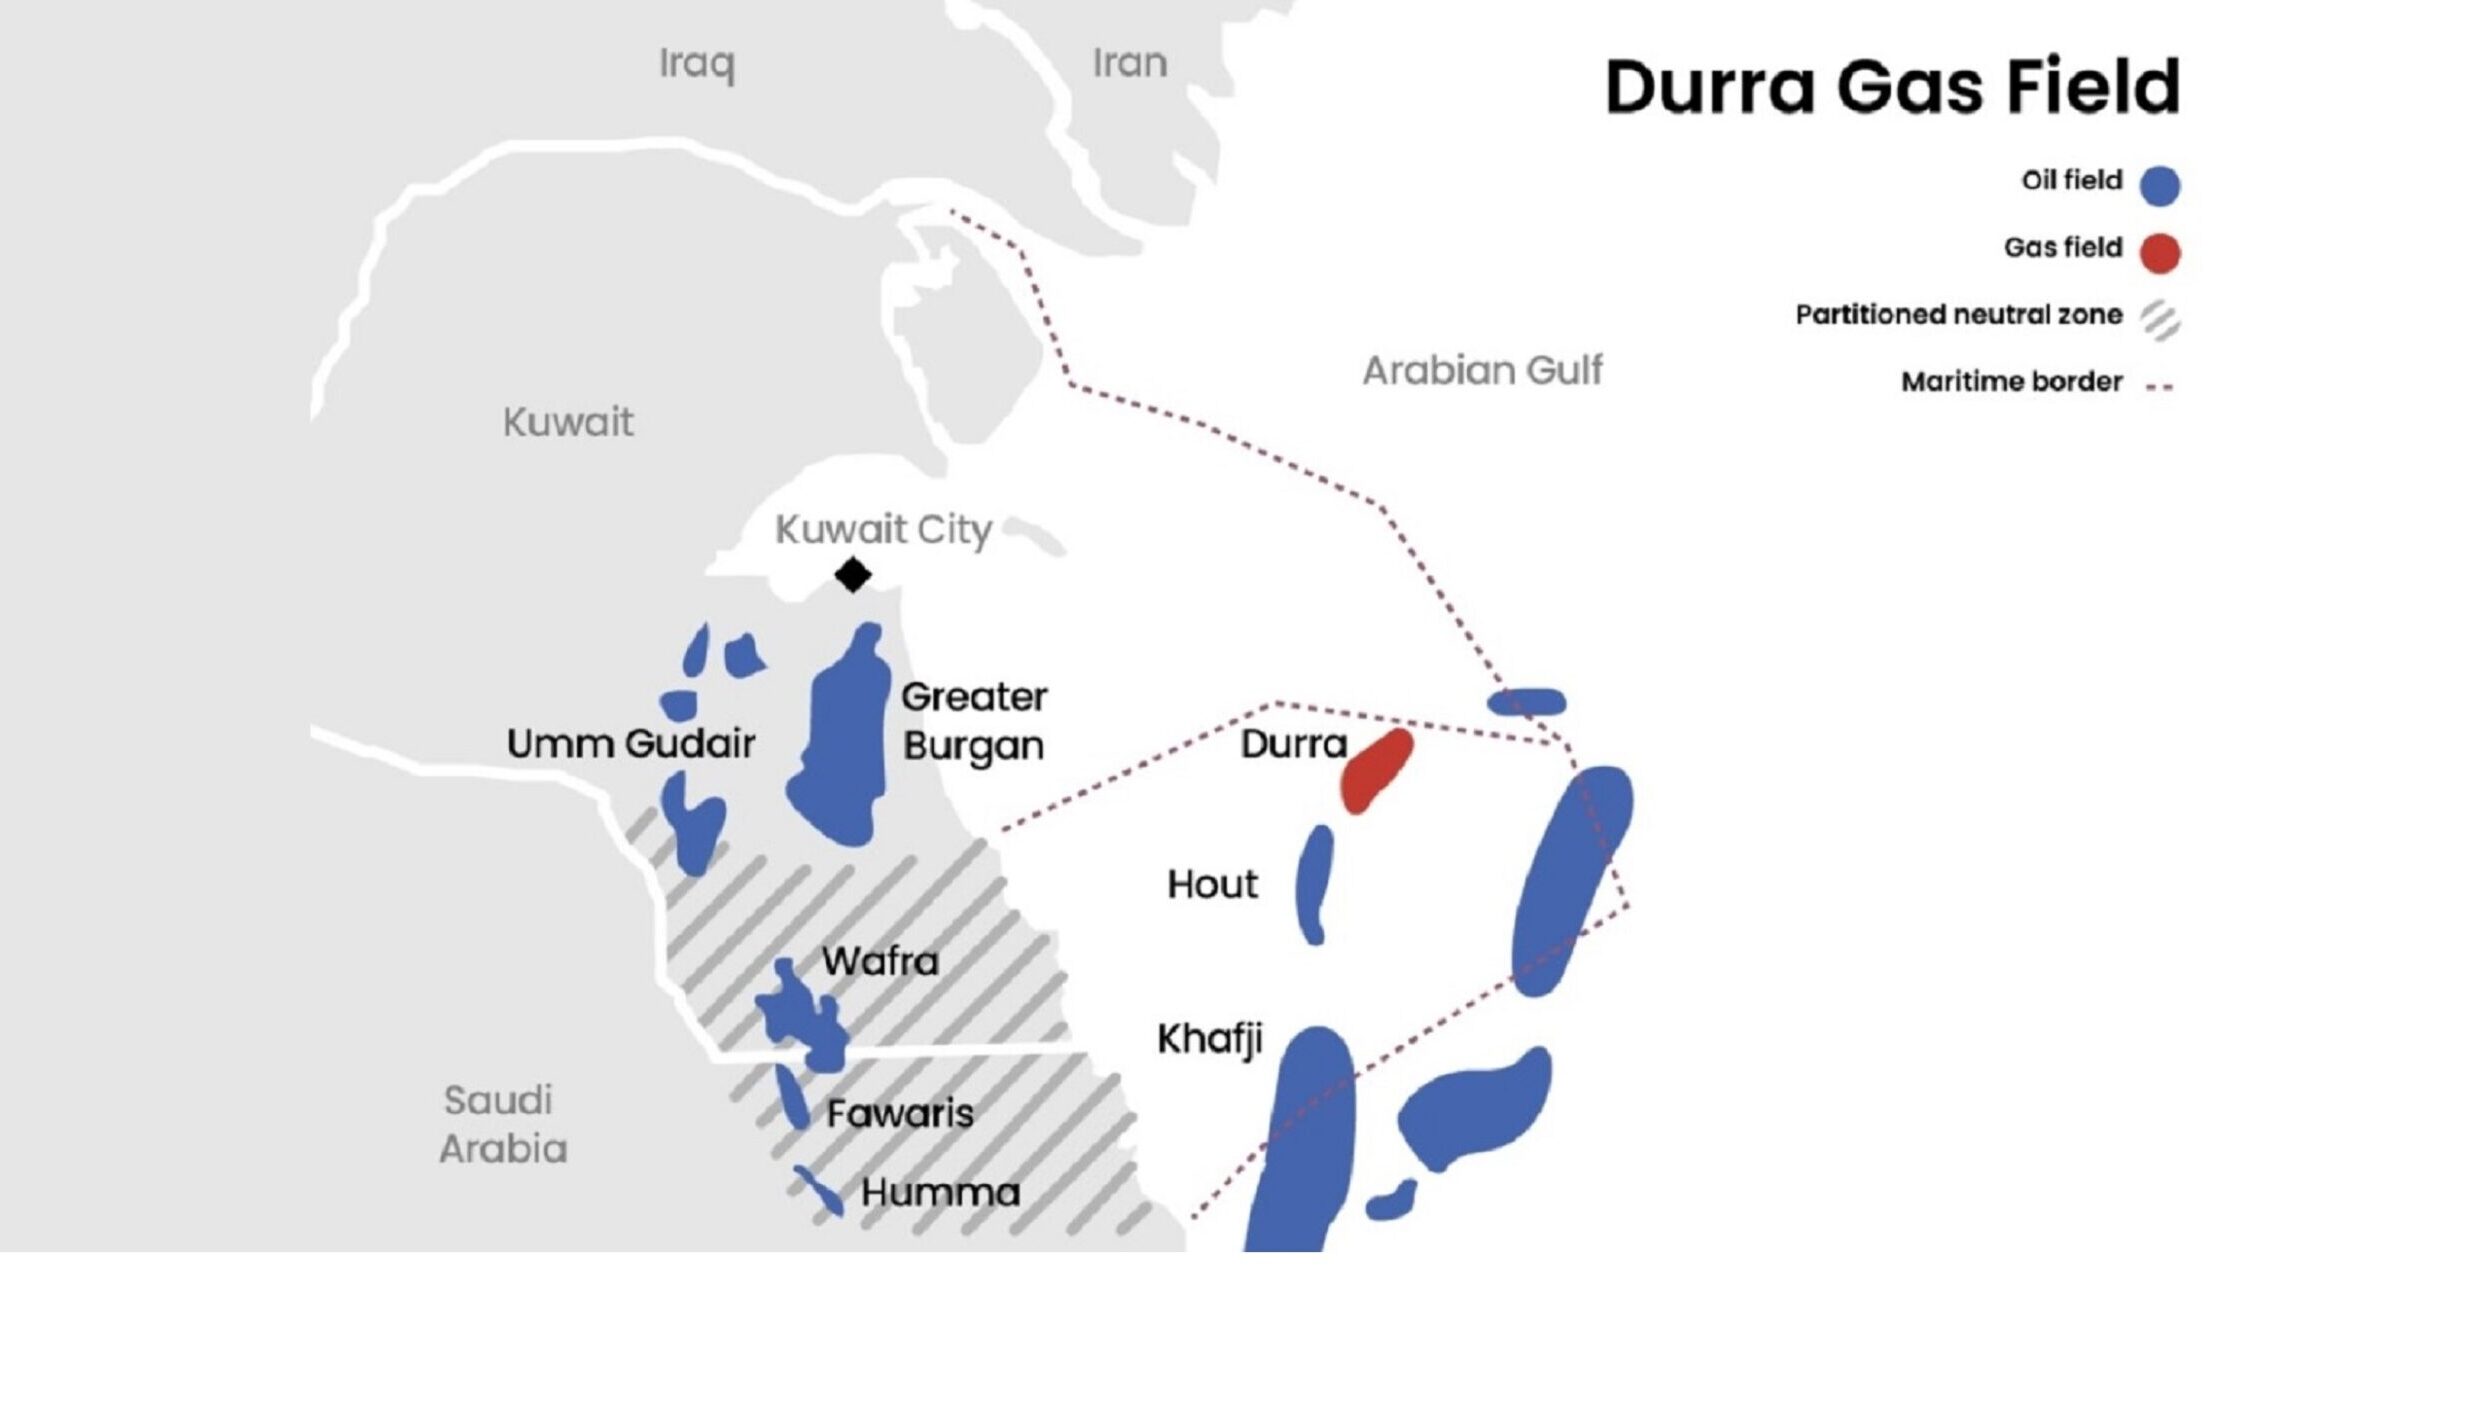 The Durra Gas Field and Security of Kuwait